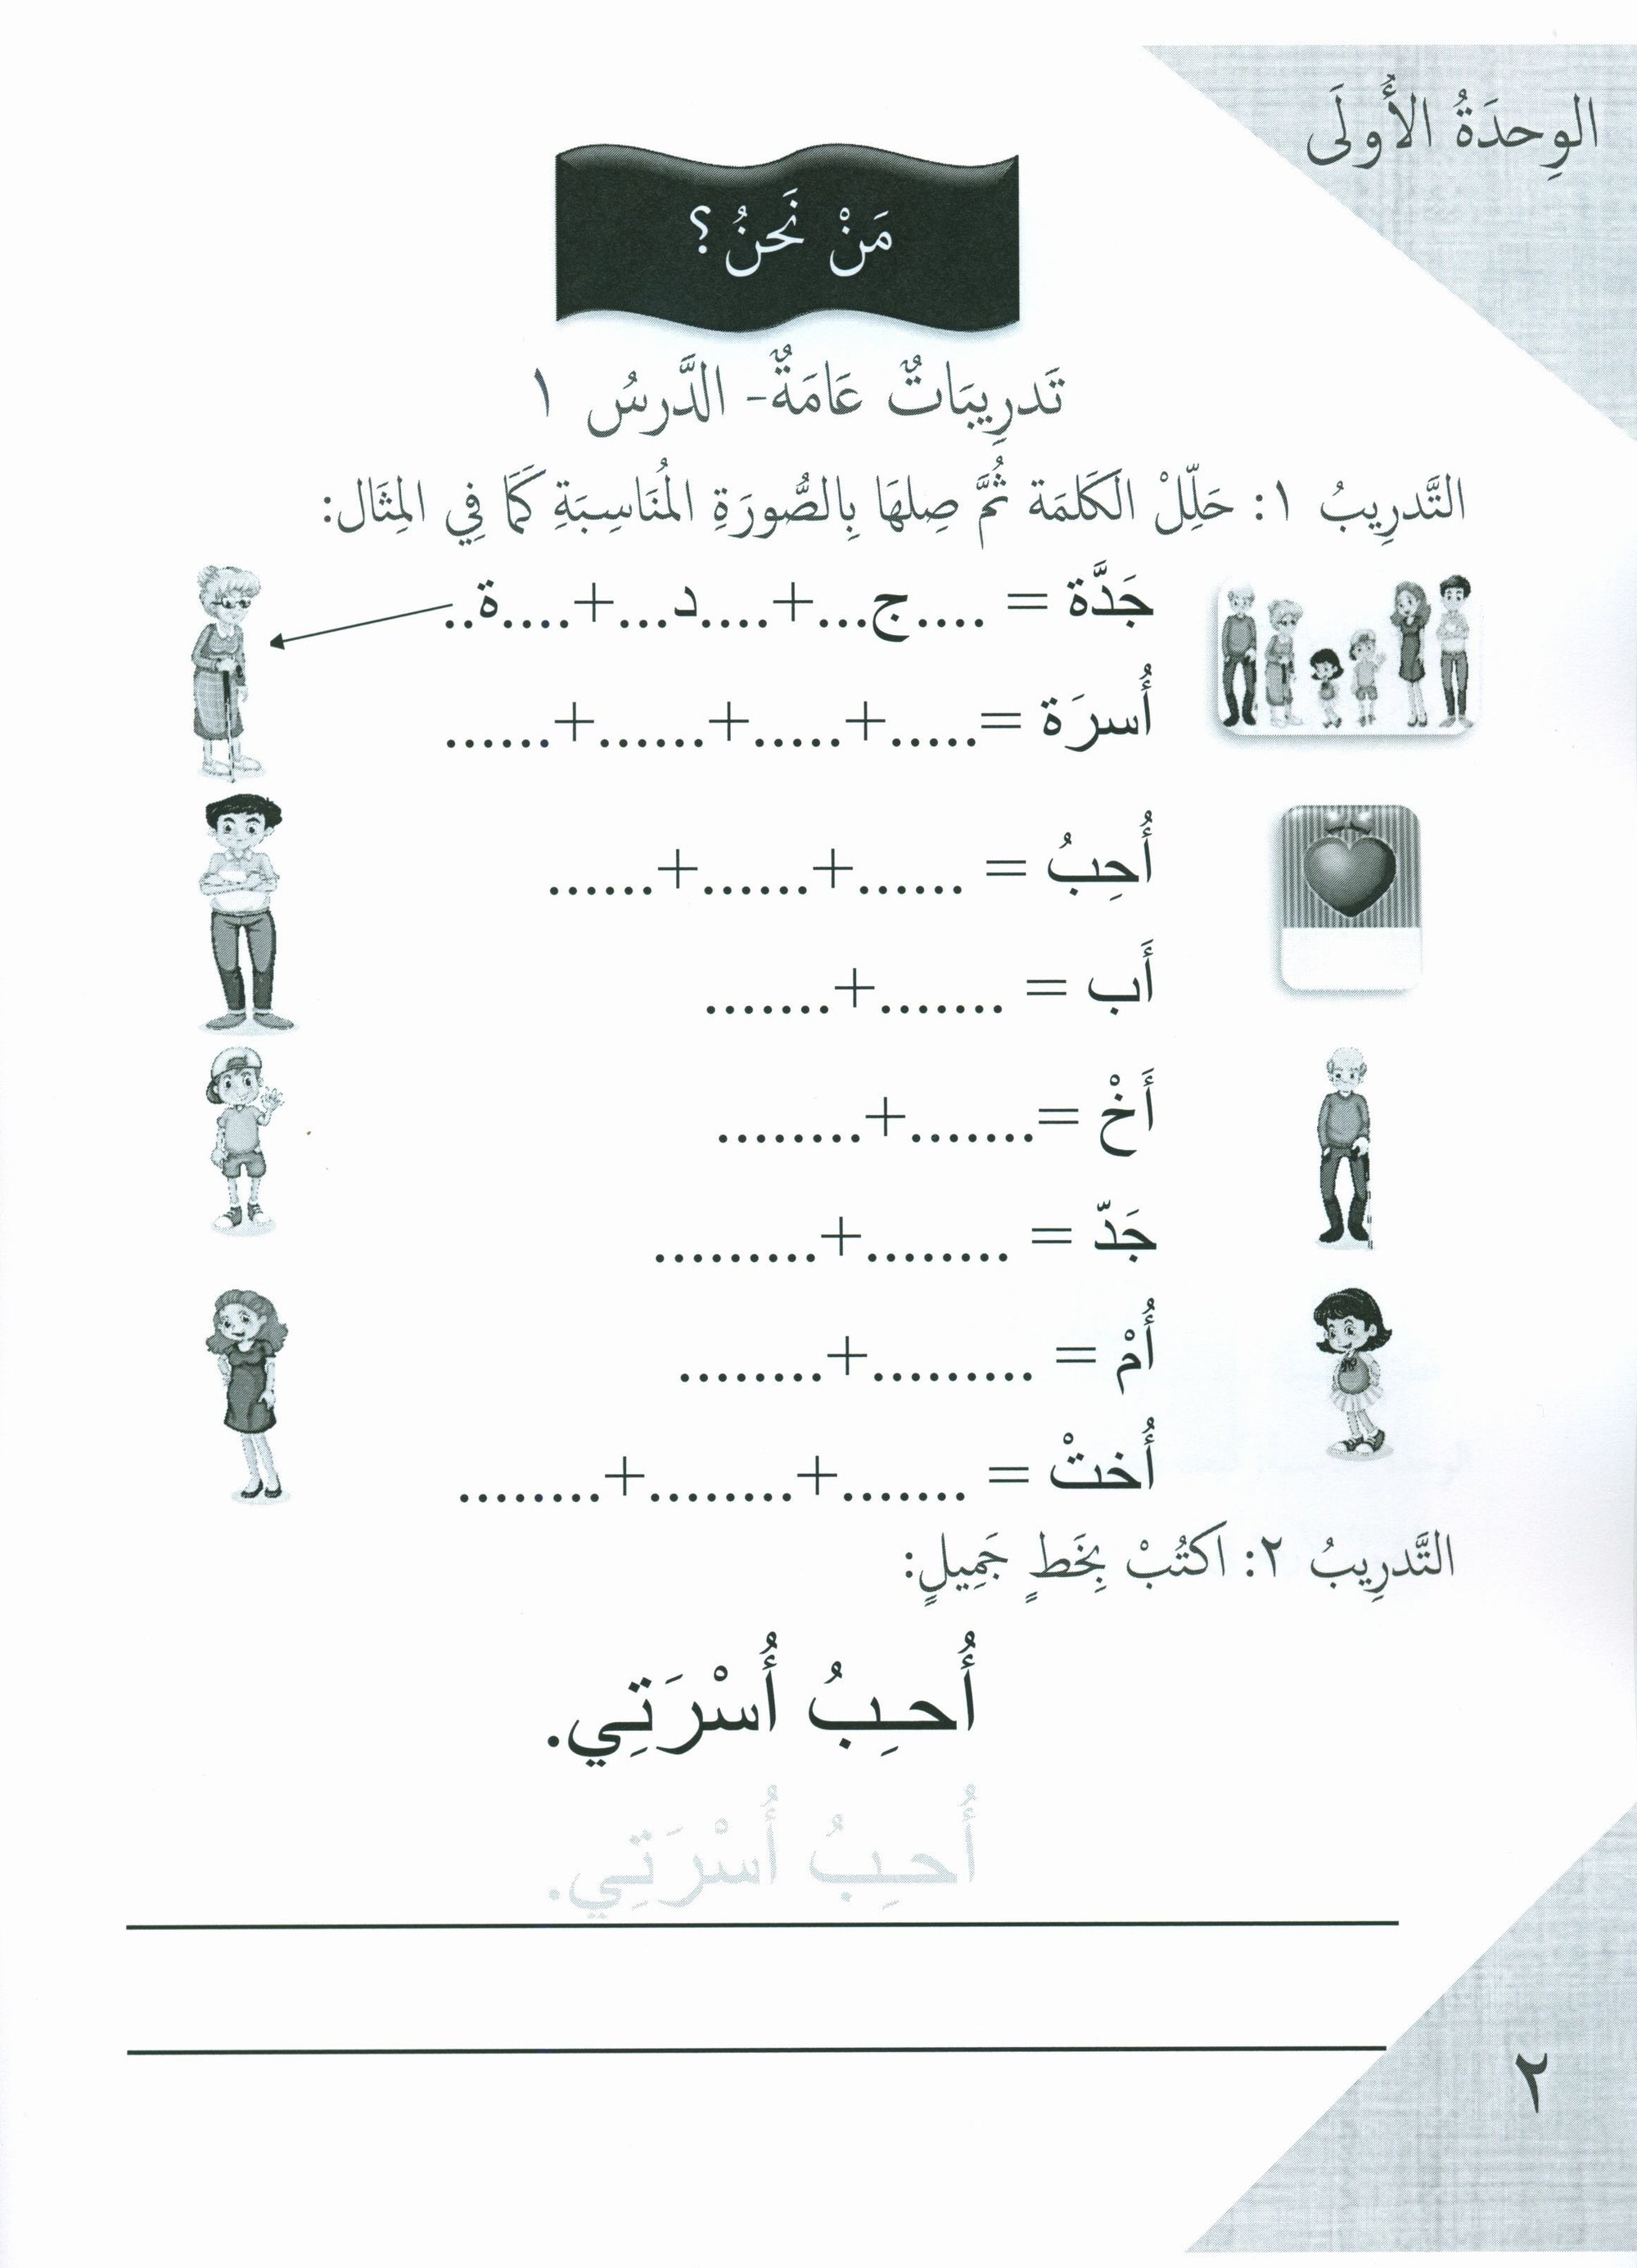 Our Language Is Our Pride Practice Level 1 لغتنا فخرنا